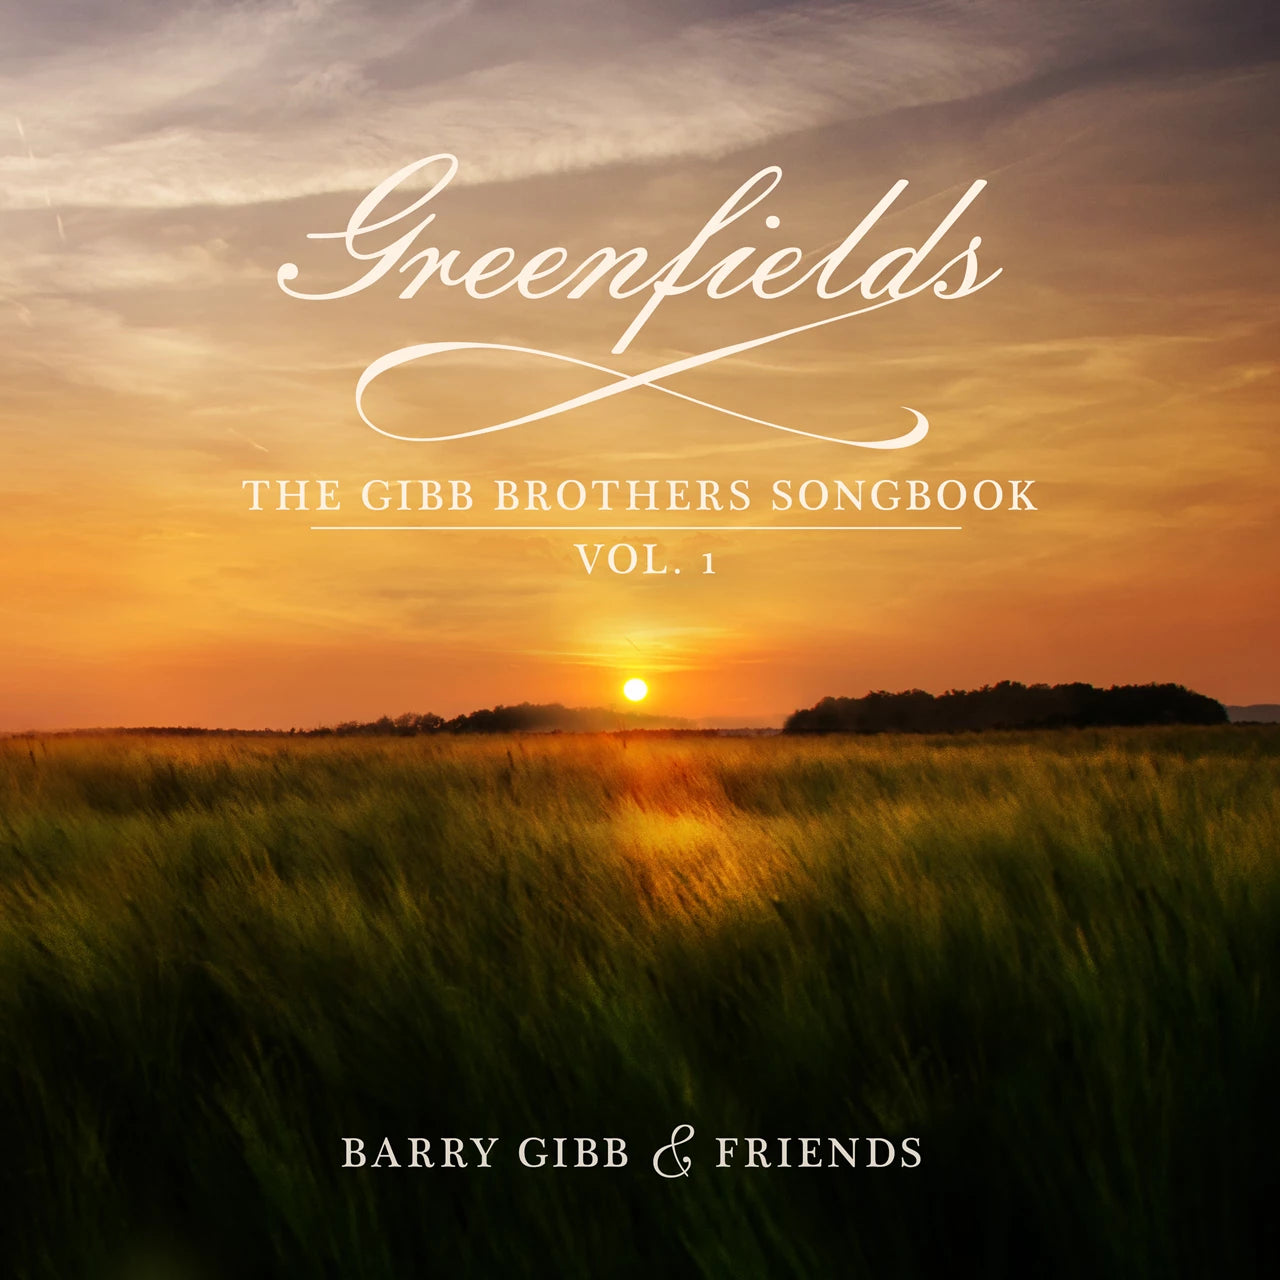 Barry Gibb & Friends - Greenfields: The Gibb Brothers Songbook - Volume 1